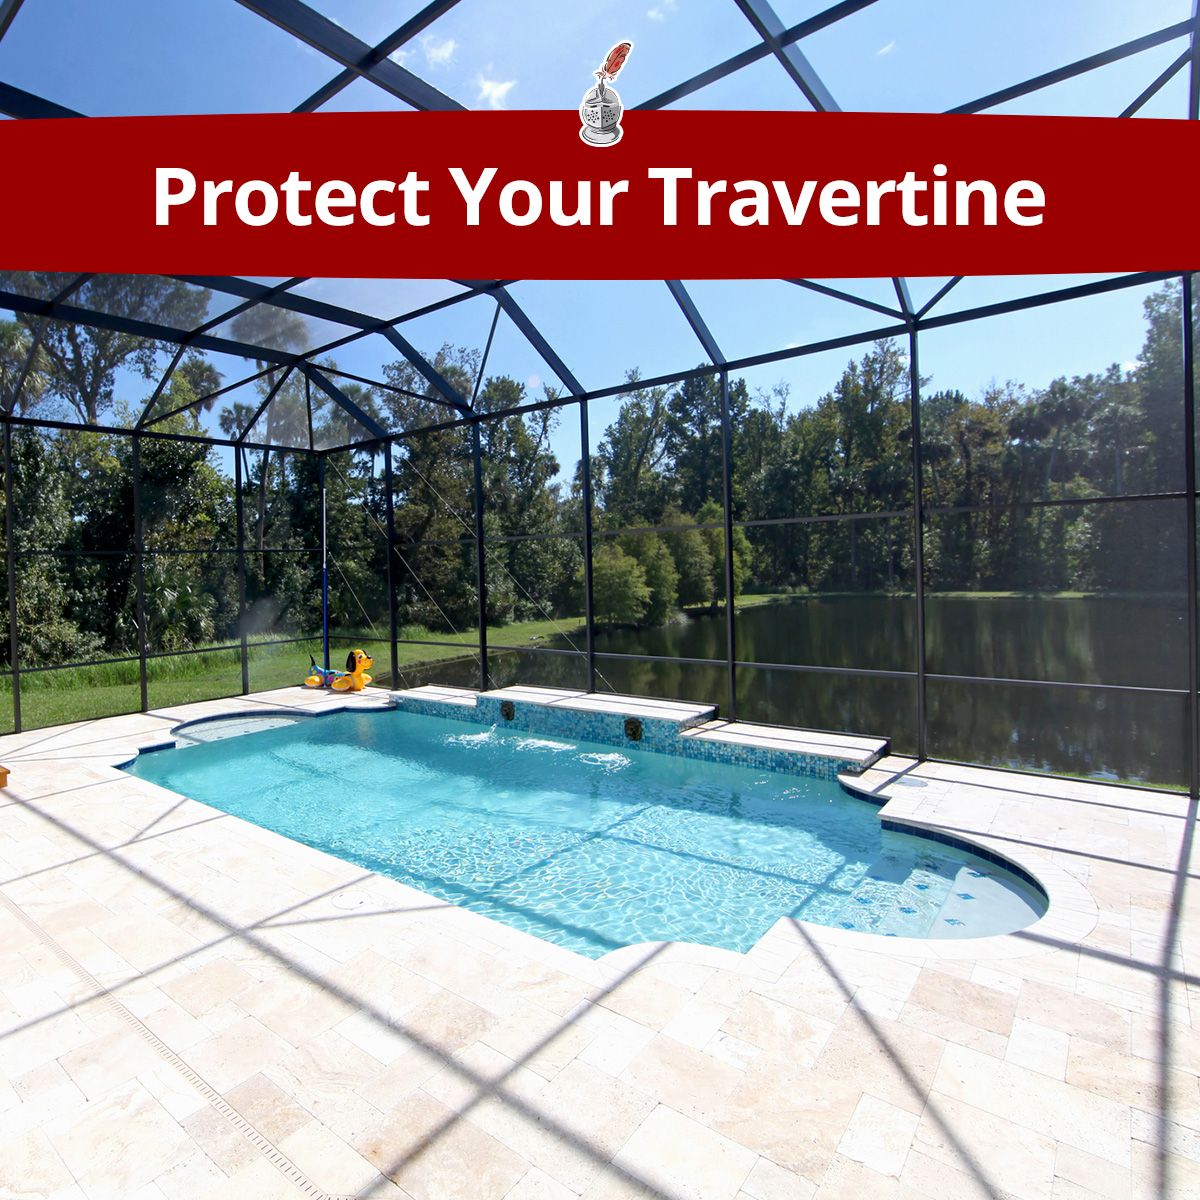 Protect Your Travertine